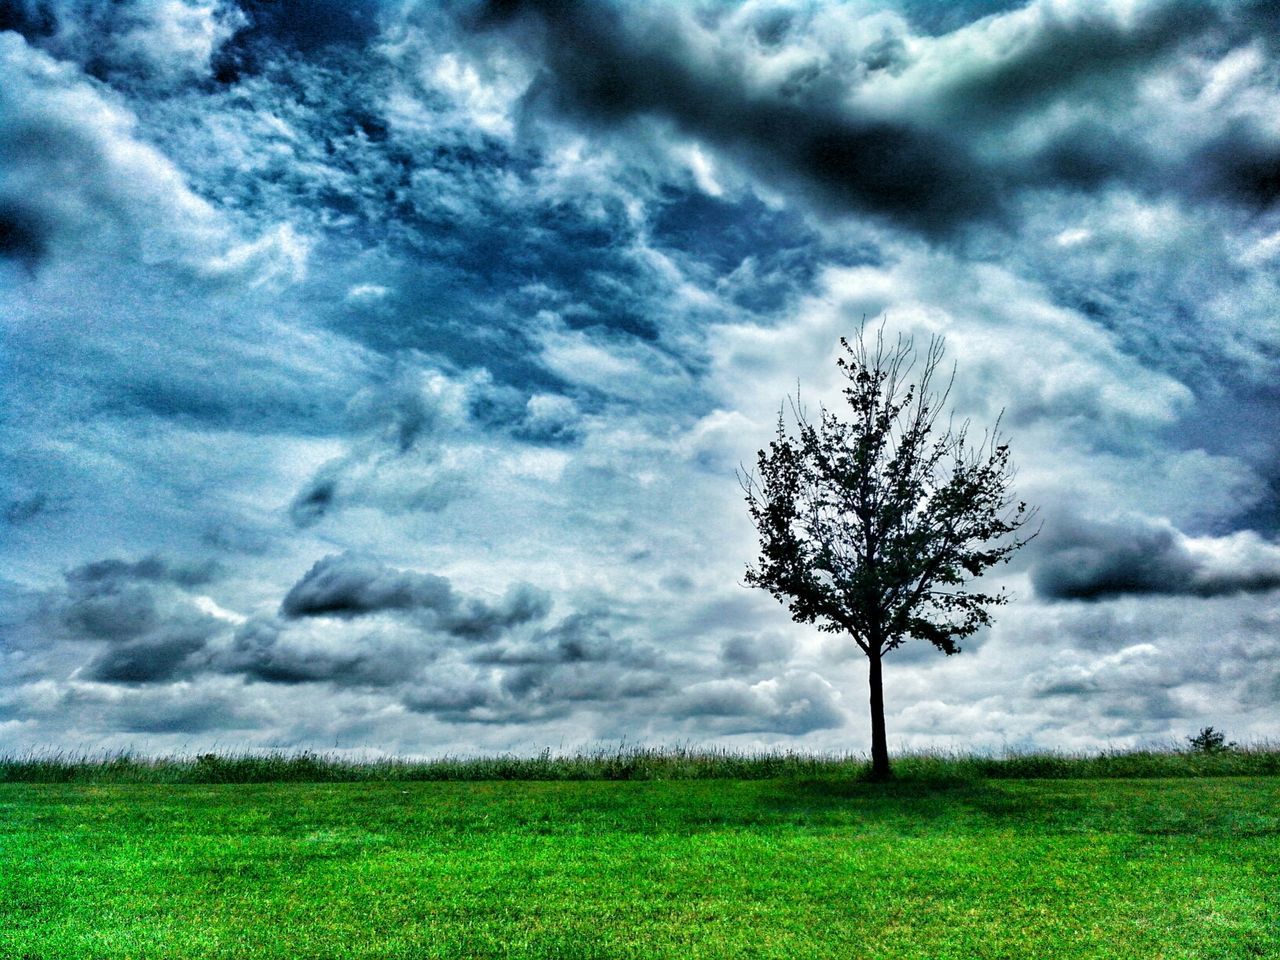 Lone tree on landscape against clouds